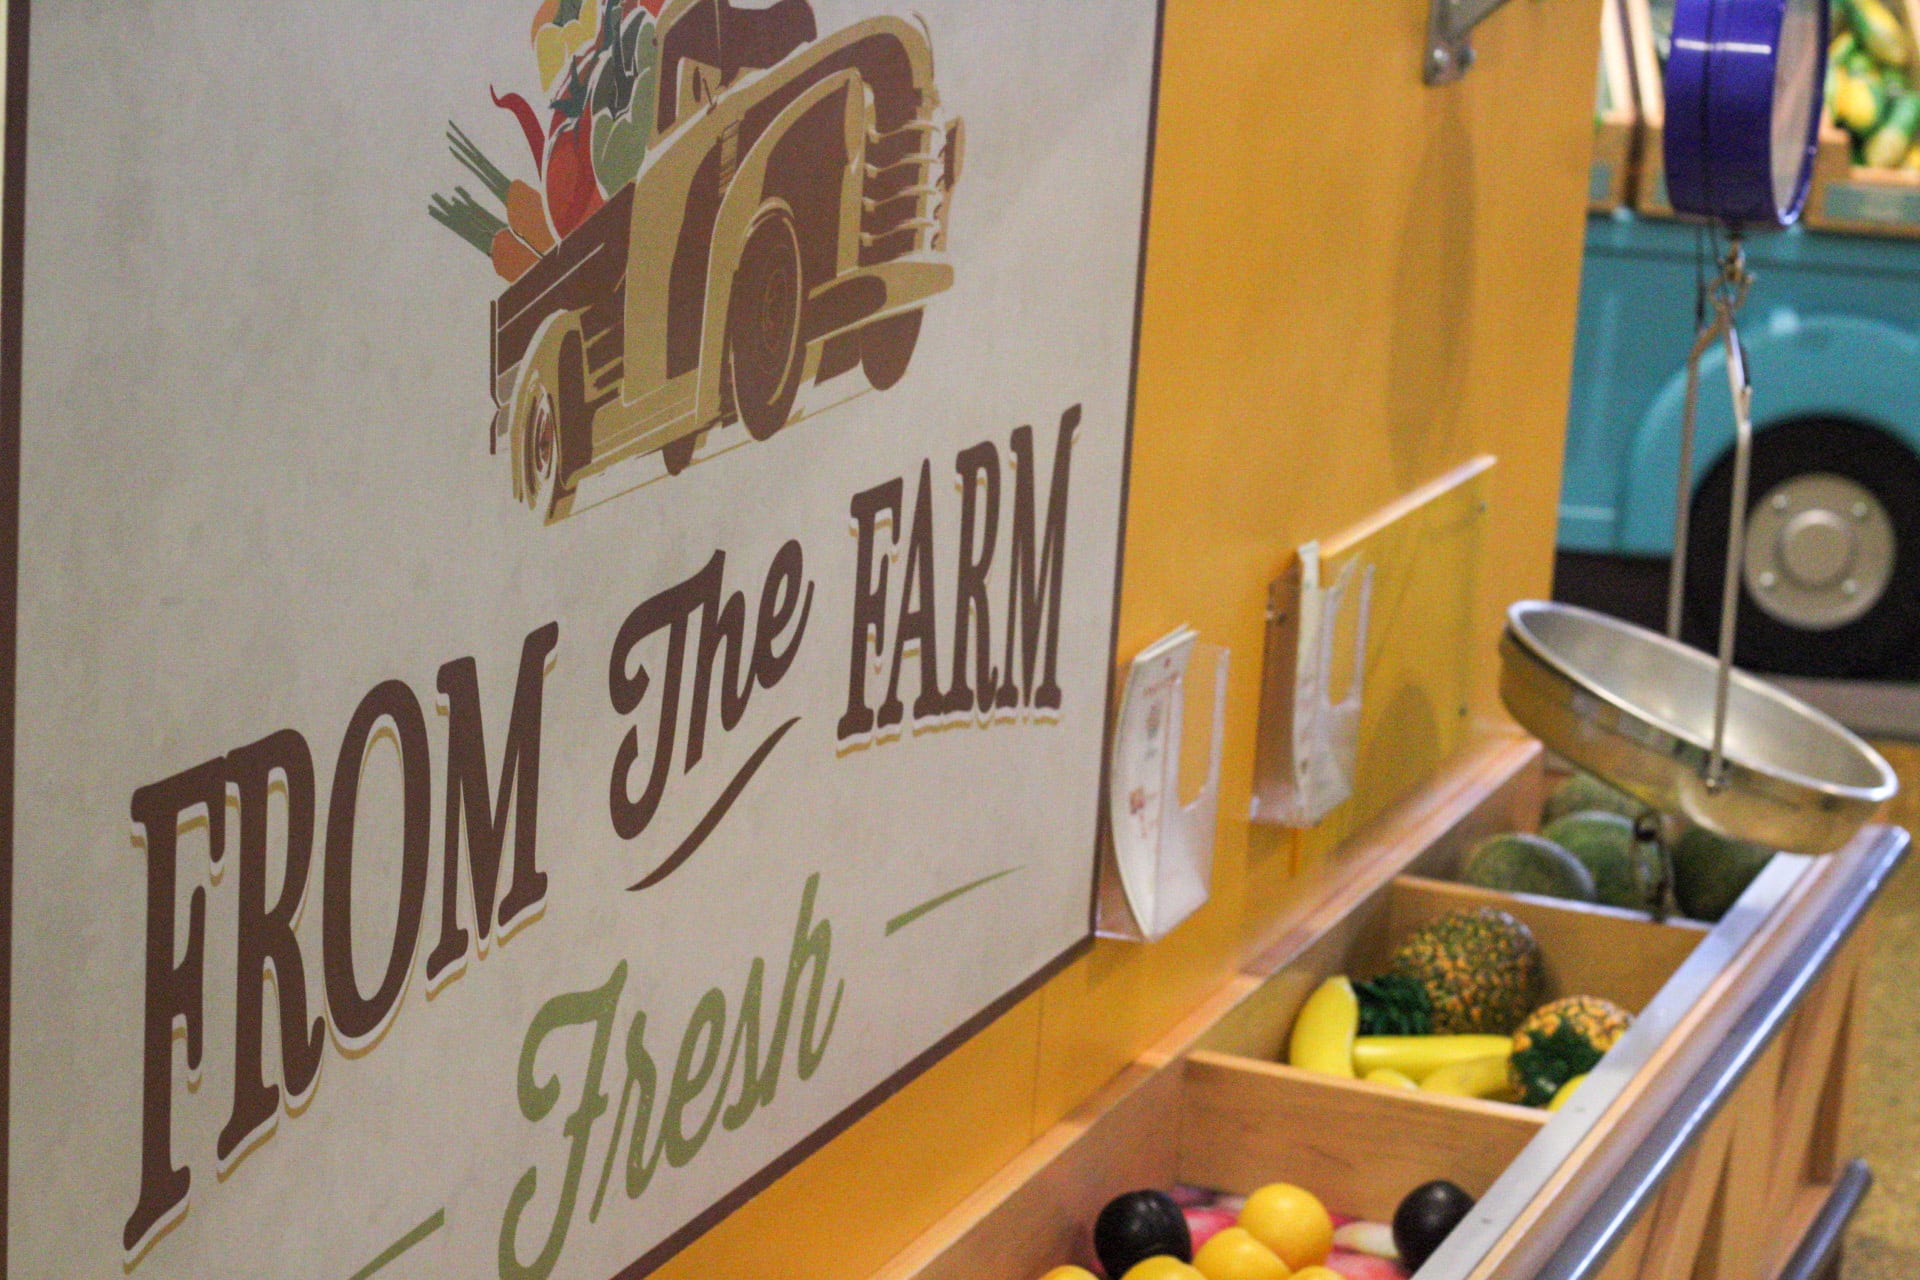 Fresh produce sign above the fruit stalls in the market exhibit.